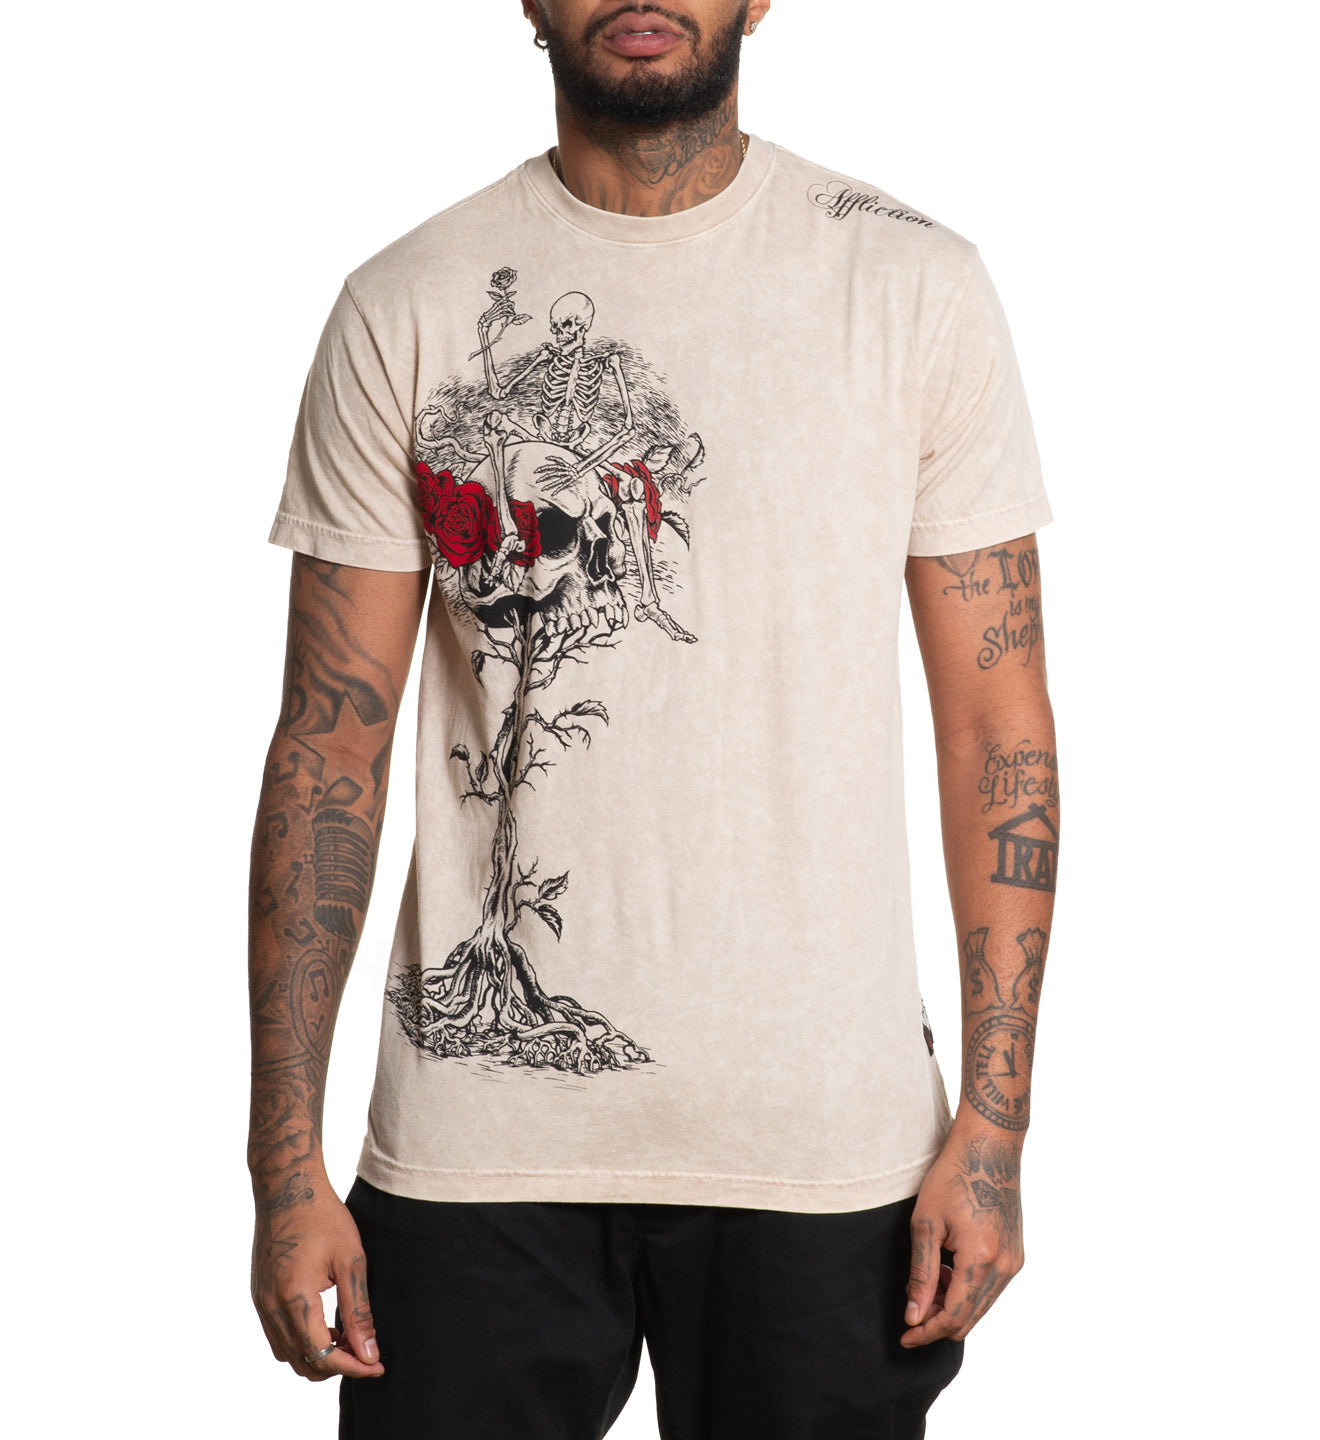 Mens Short Sleeve Tees - Roses For The Dead